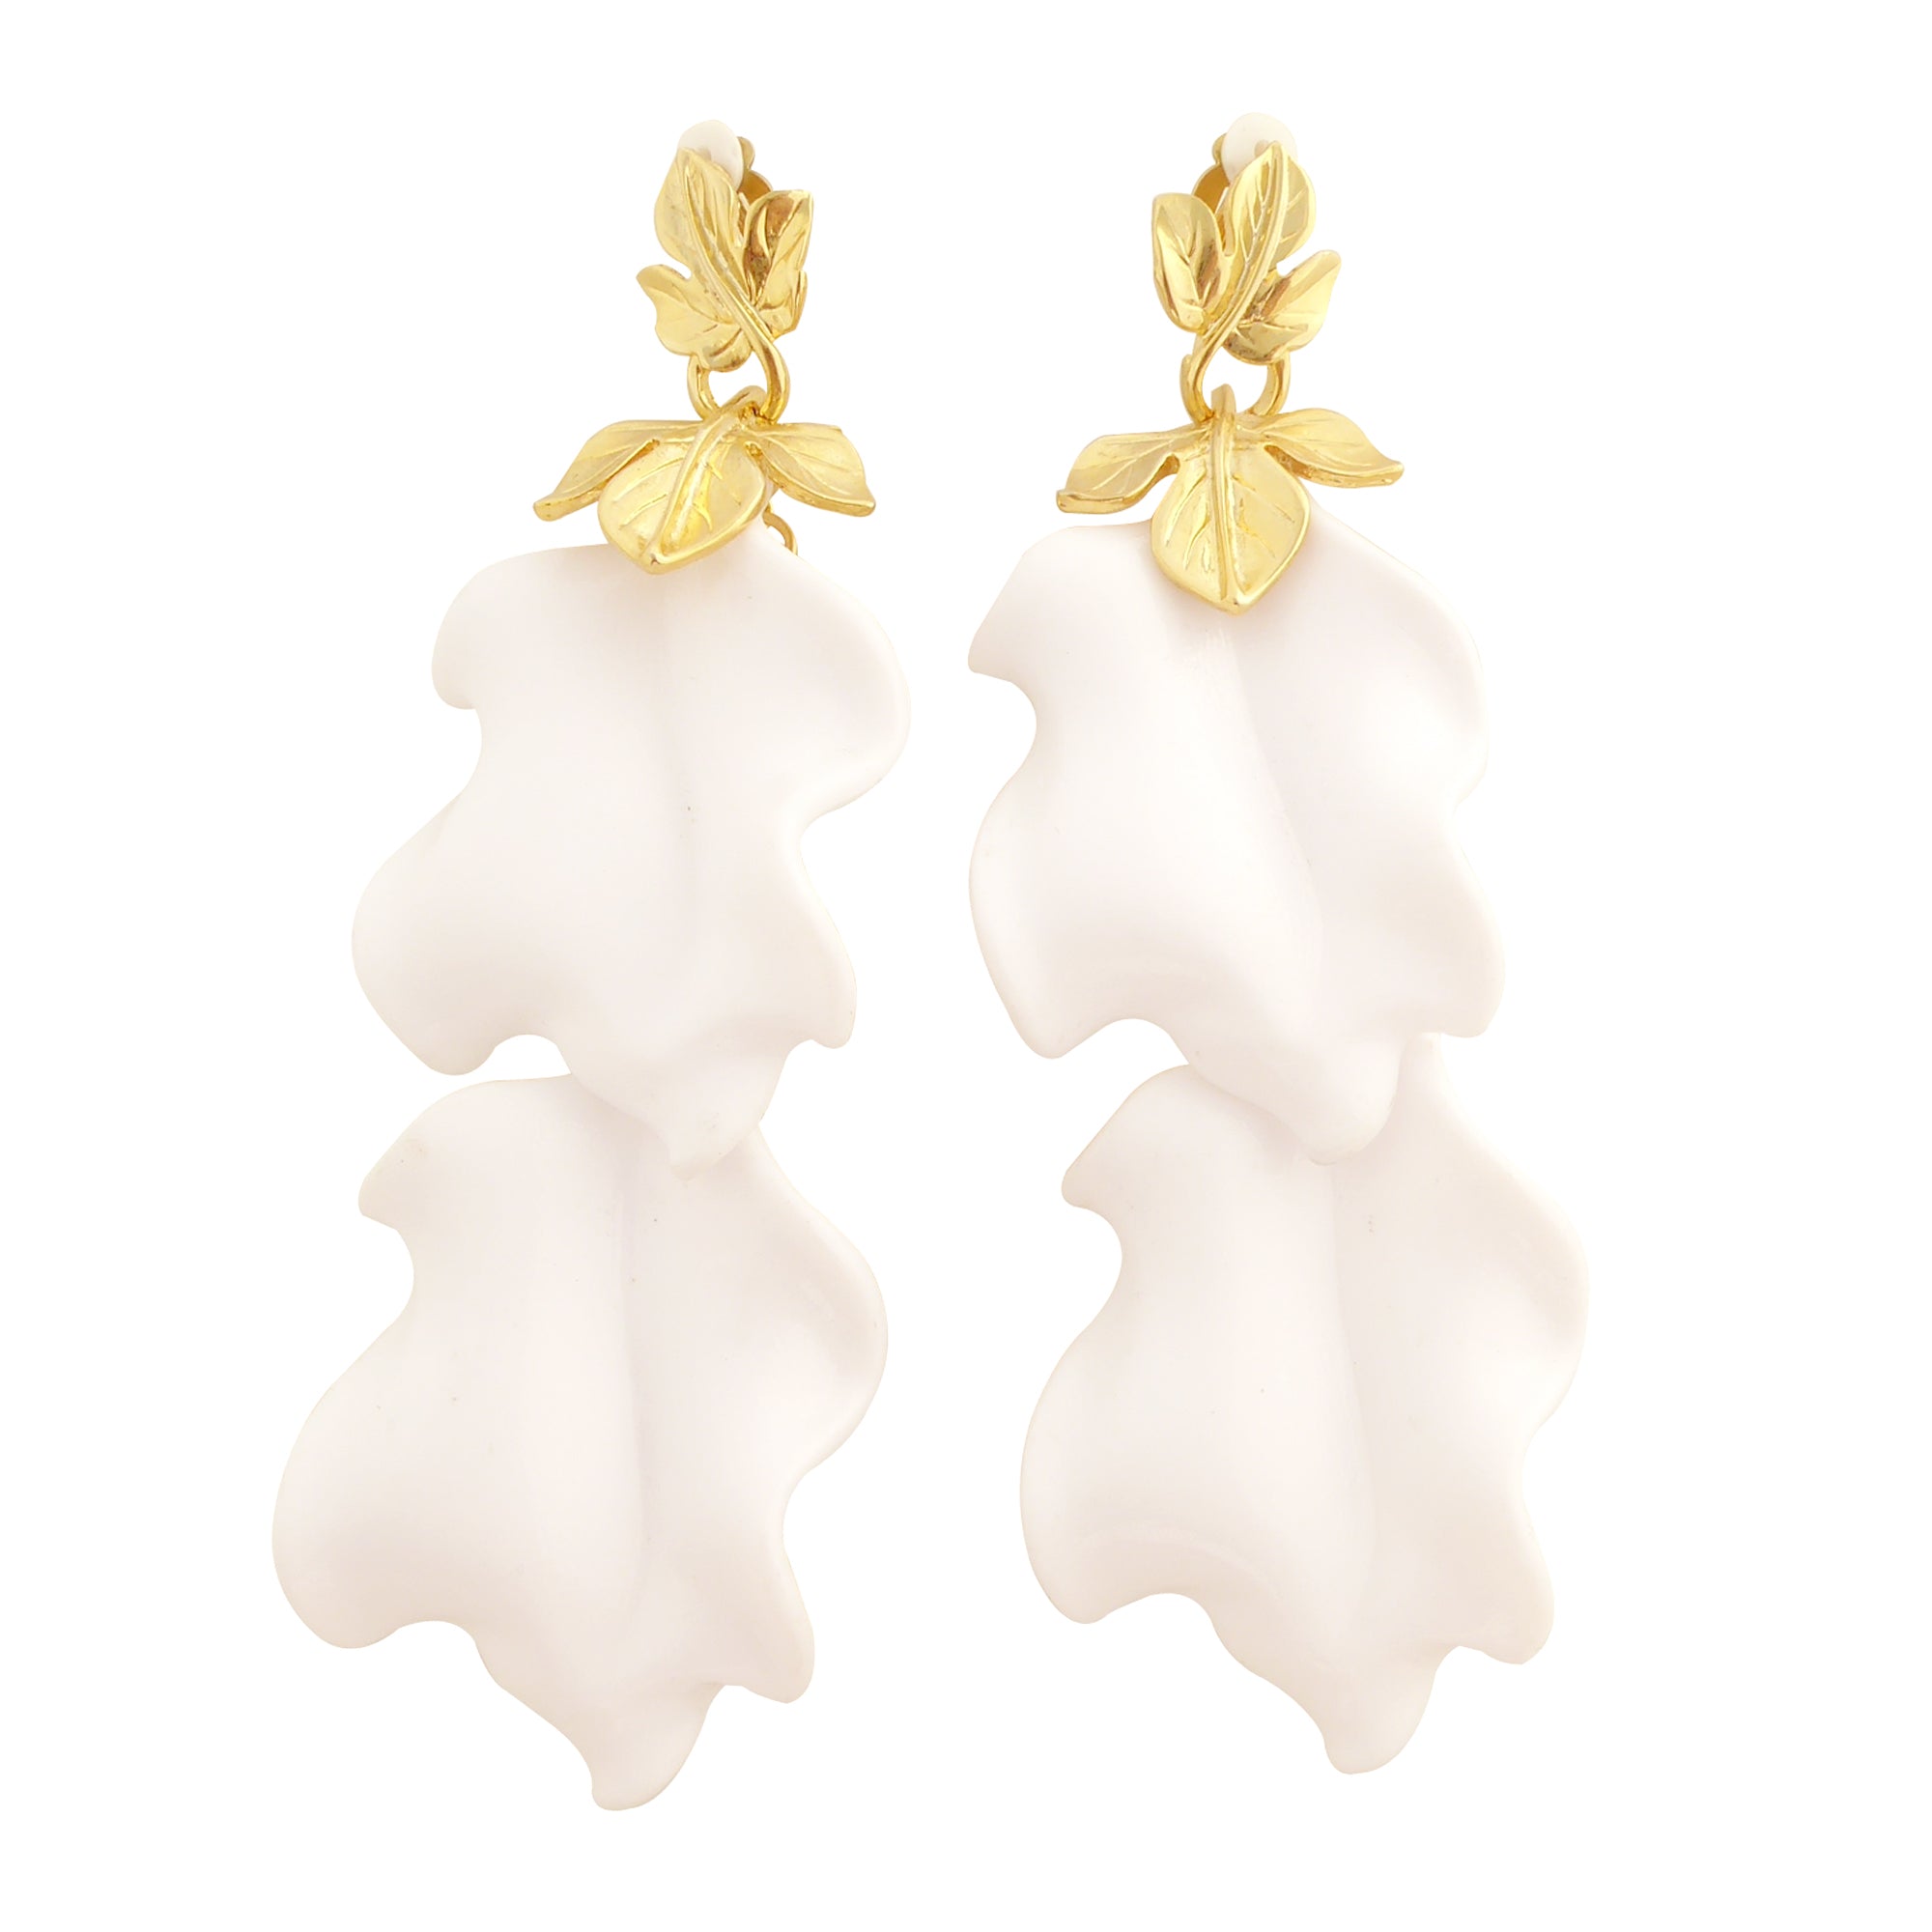 White and gold leaf earrings by Jenny Dayco 1